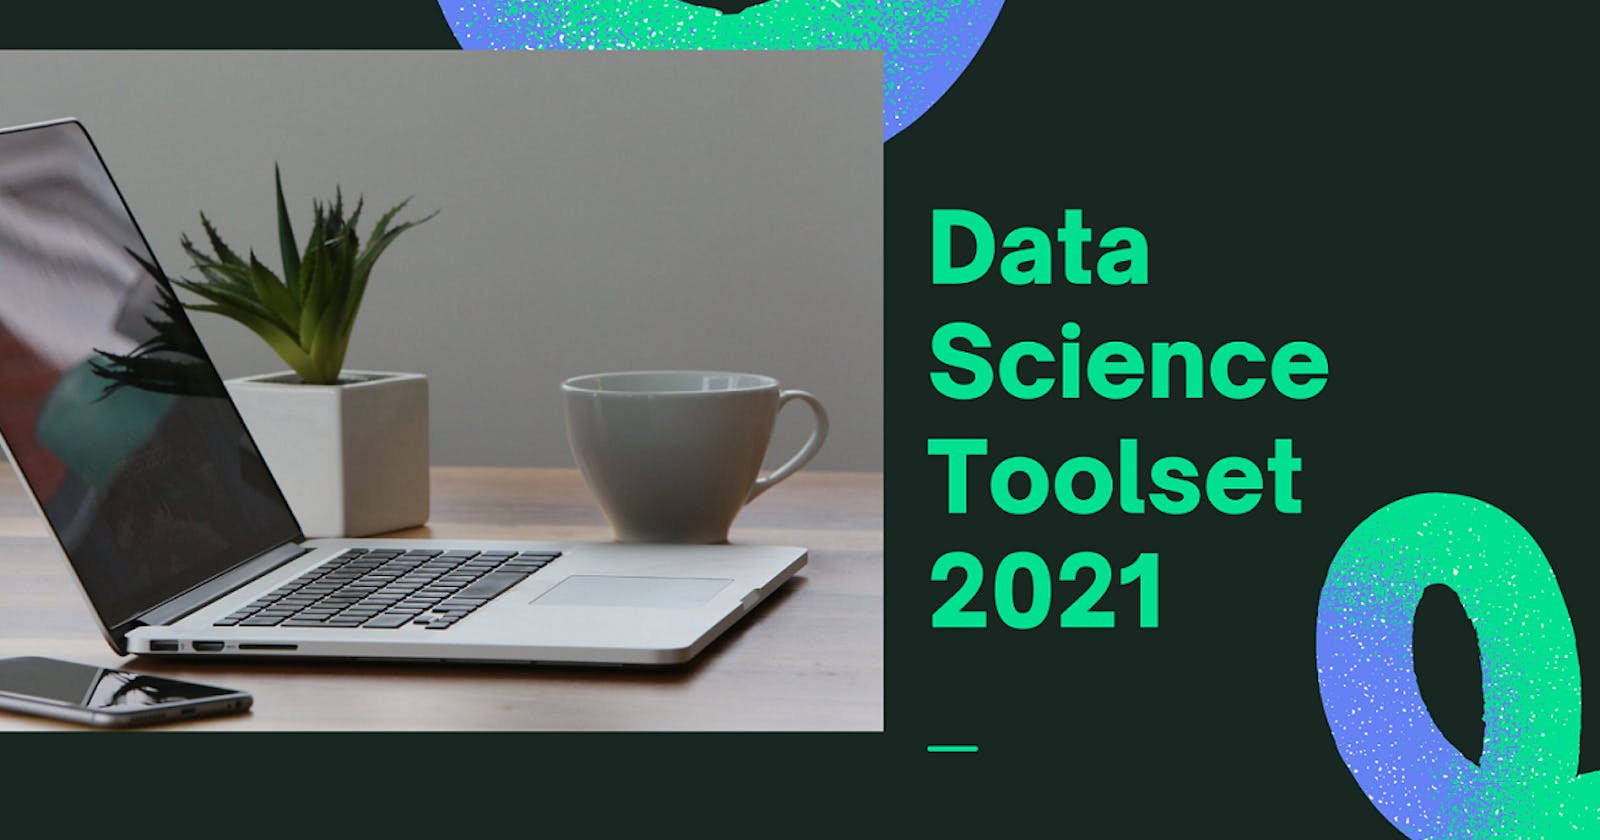 Data Science toolset summary from 2021